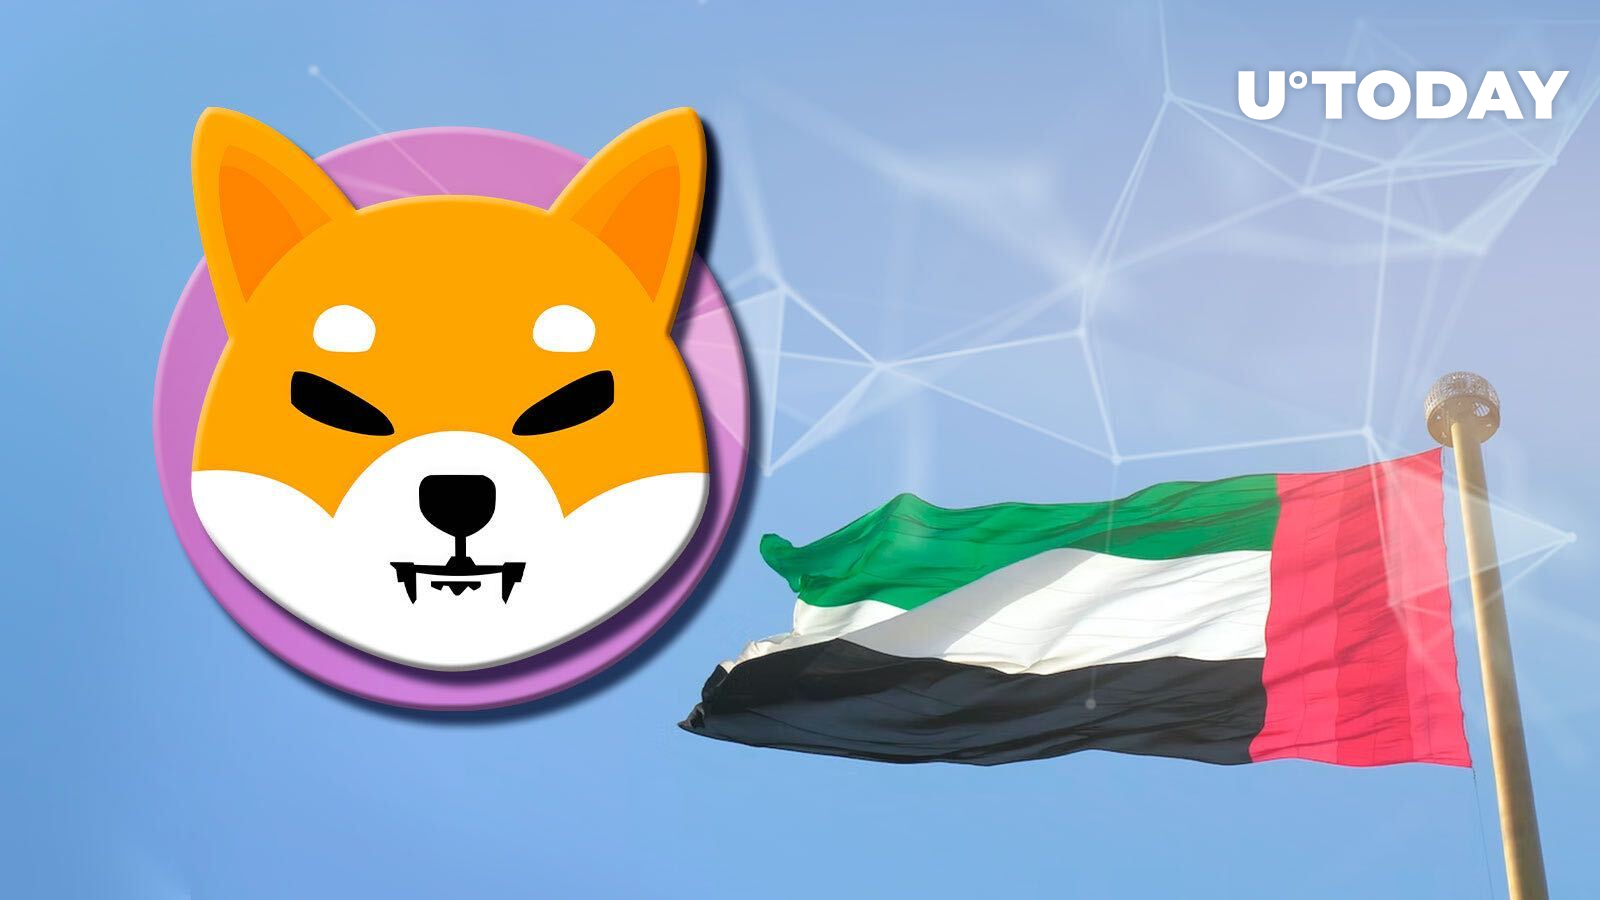 Shiba Inu (SHIB) Can Get Greater Use in UAE Thanks to This Partnership